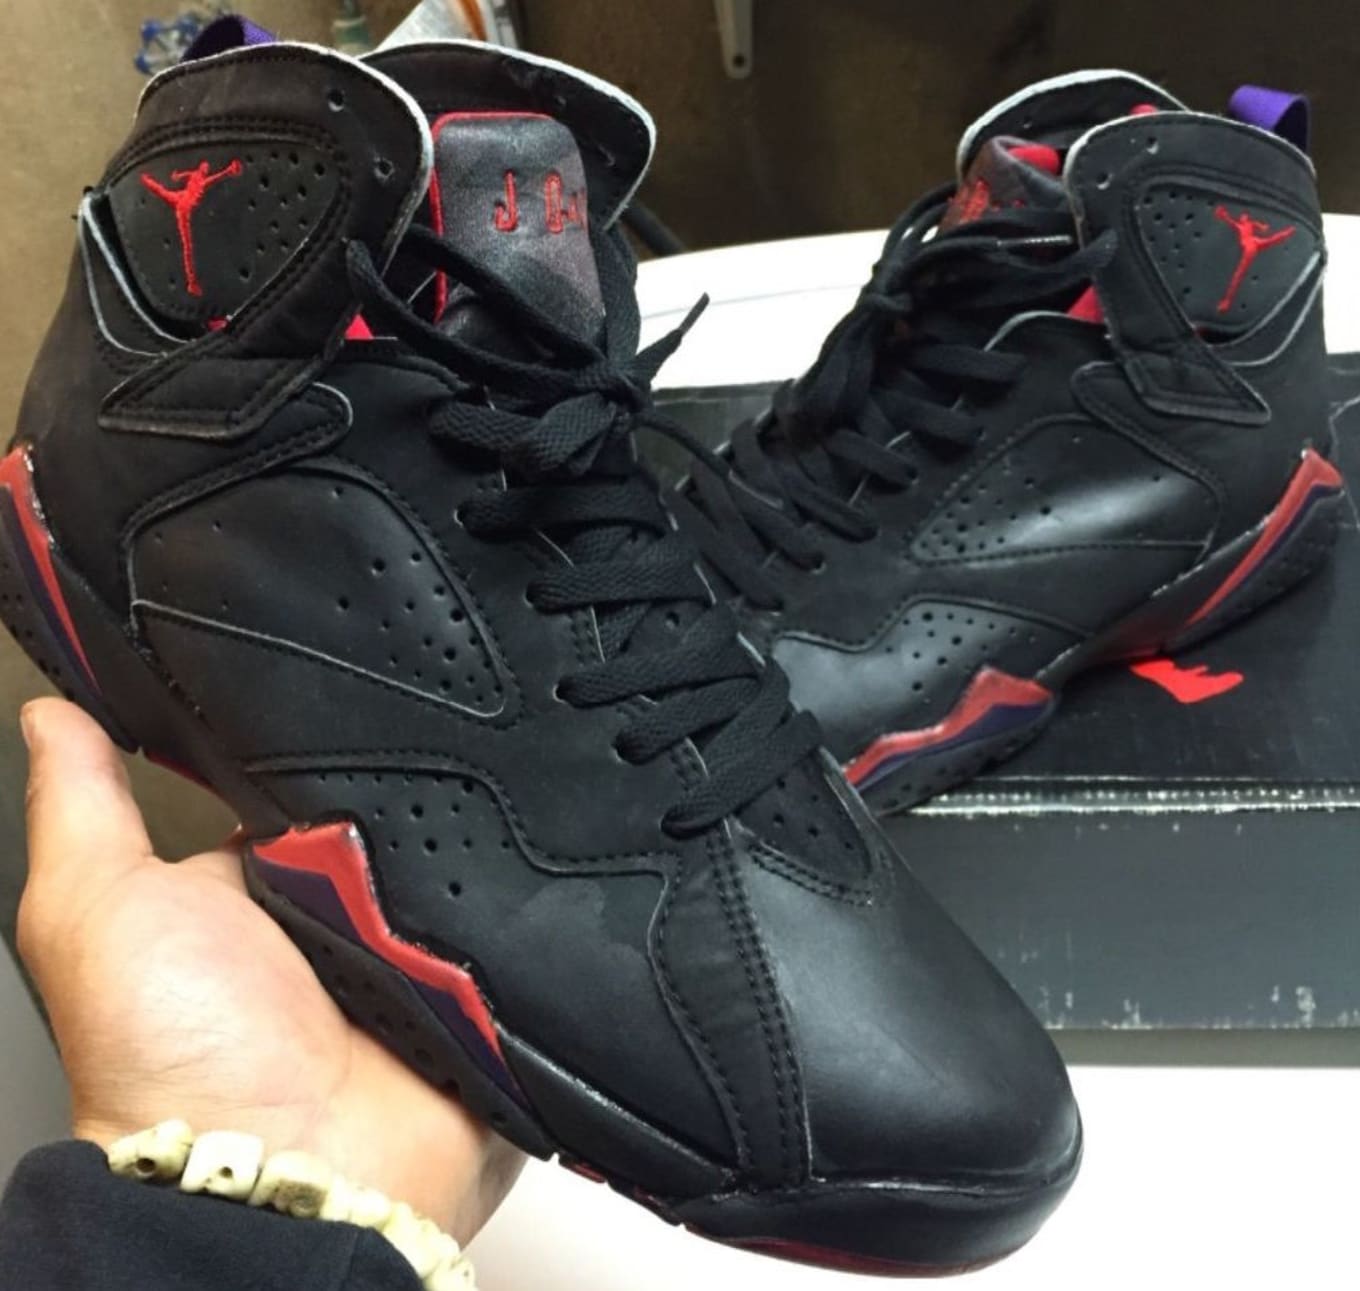 Air Jordans from the 90s can Buy on eBay Right Now | Collector